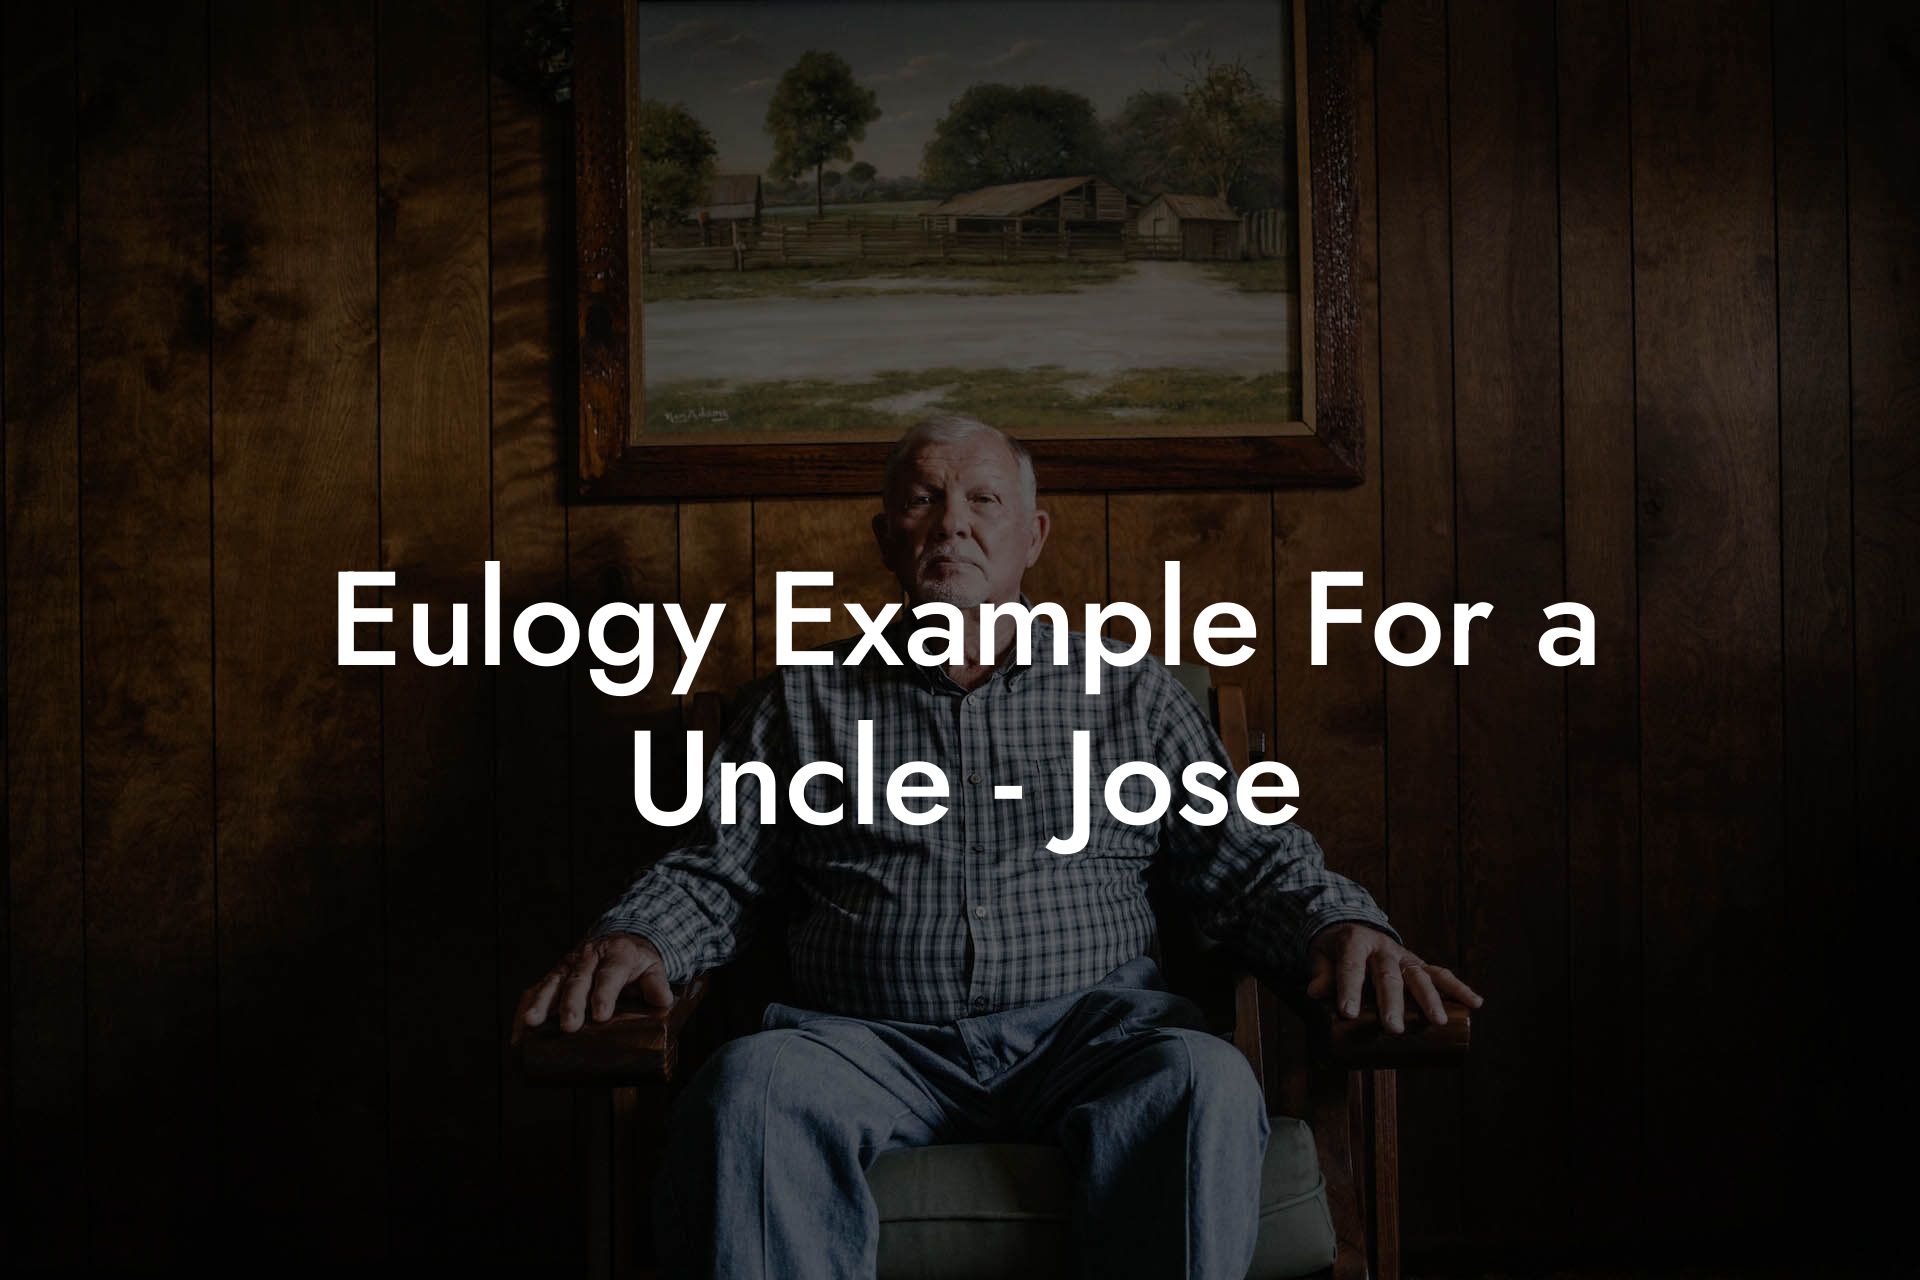 Eulogy Example For a Uncle - Jose